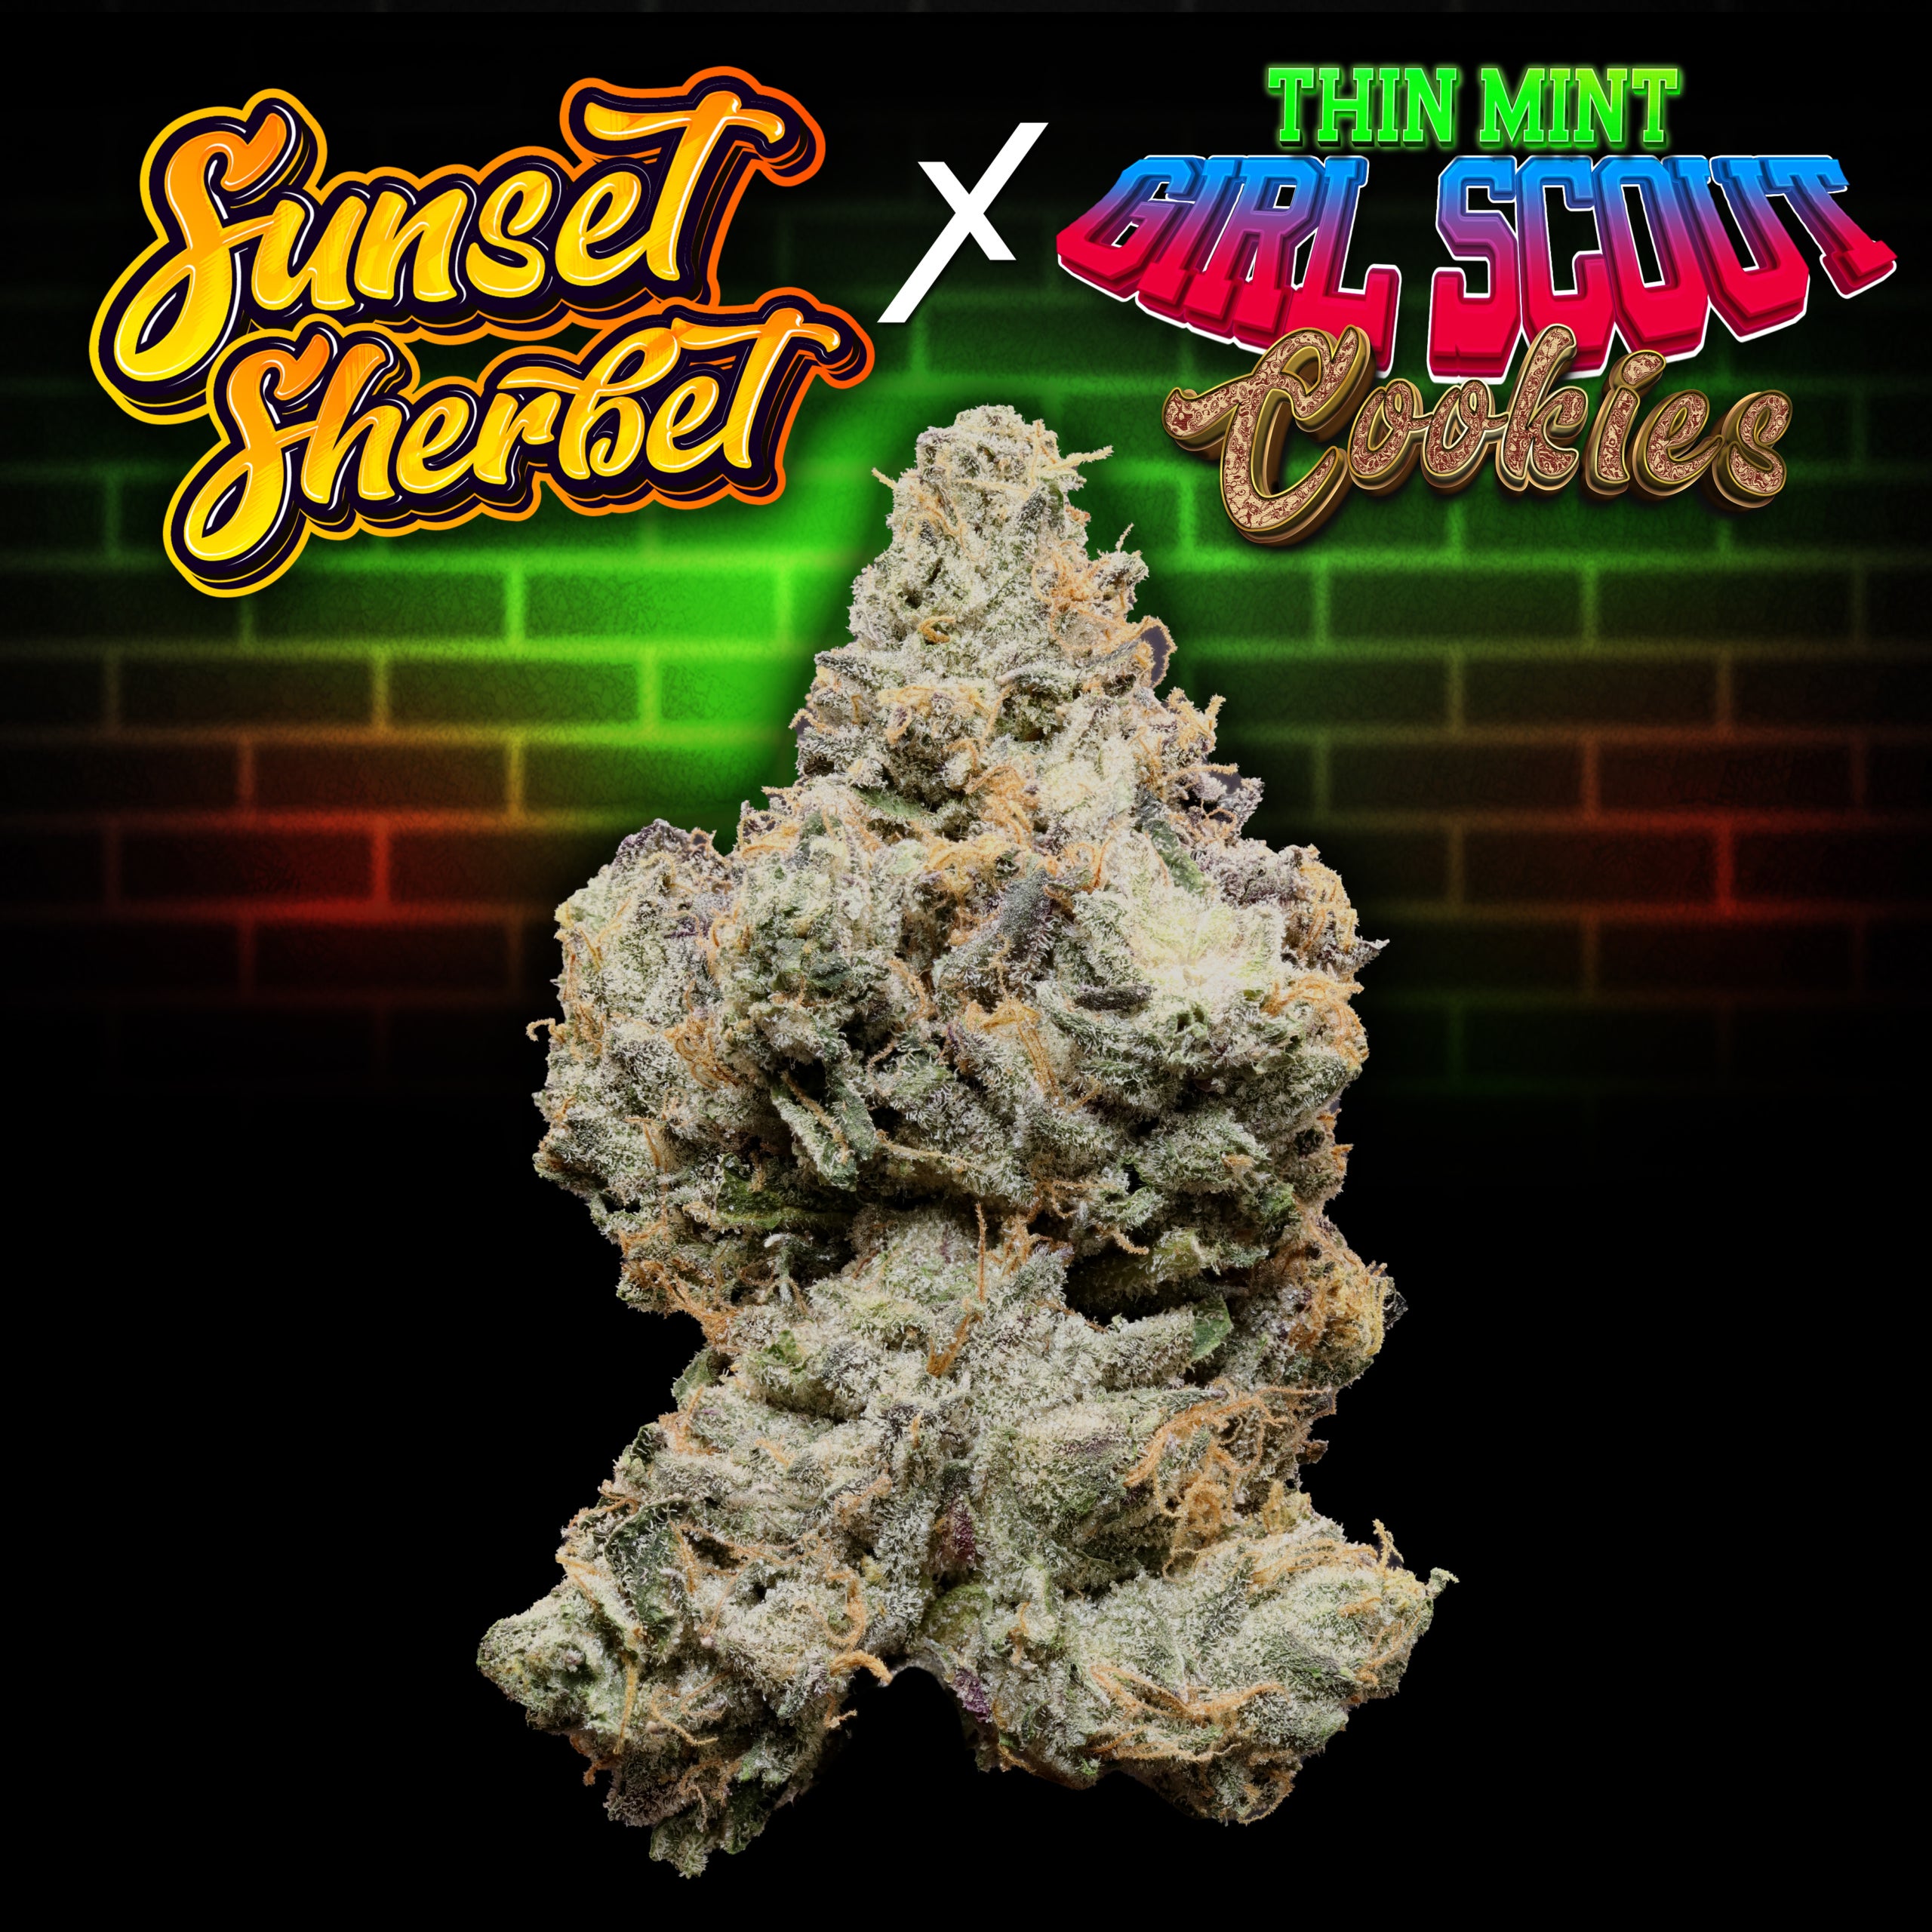 Sunset Sherbet x Thin Mint Girl Scout Cookies